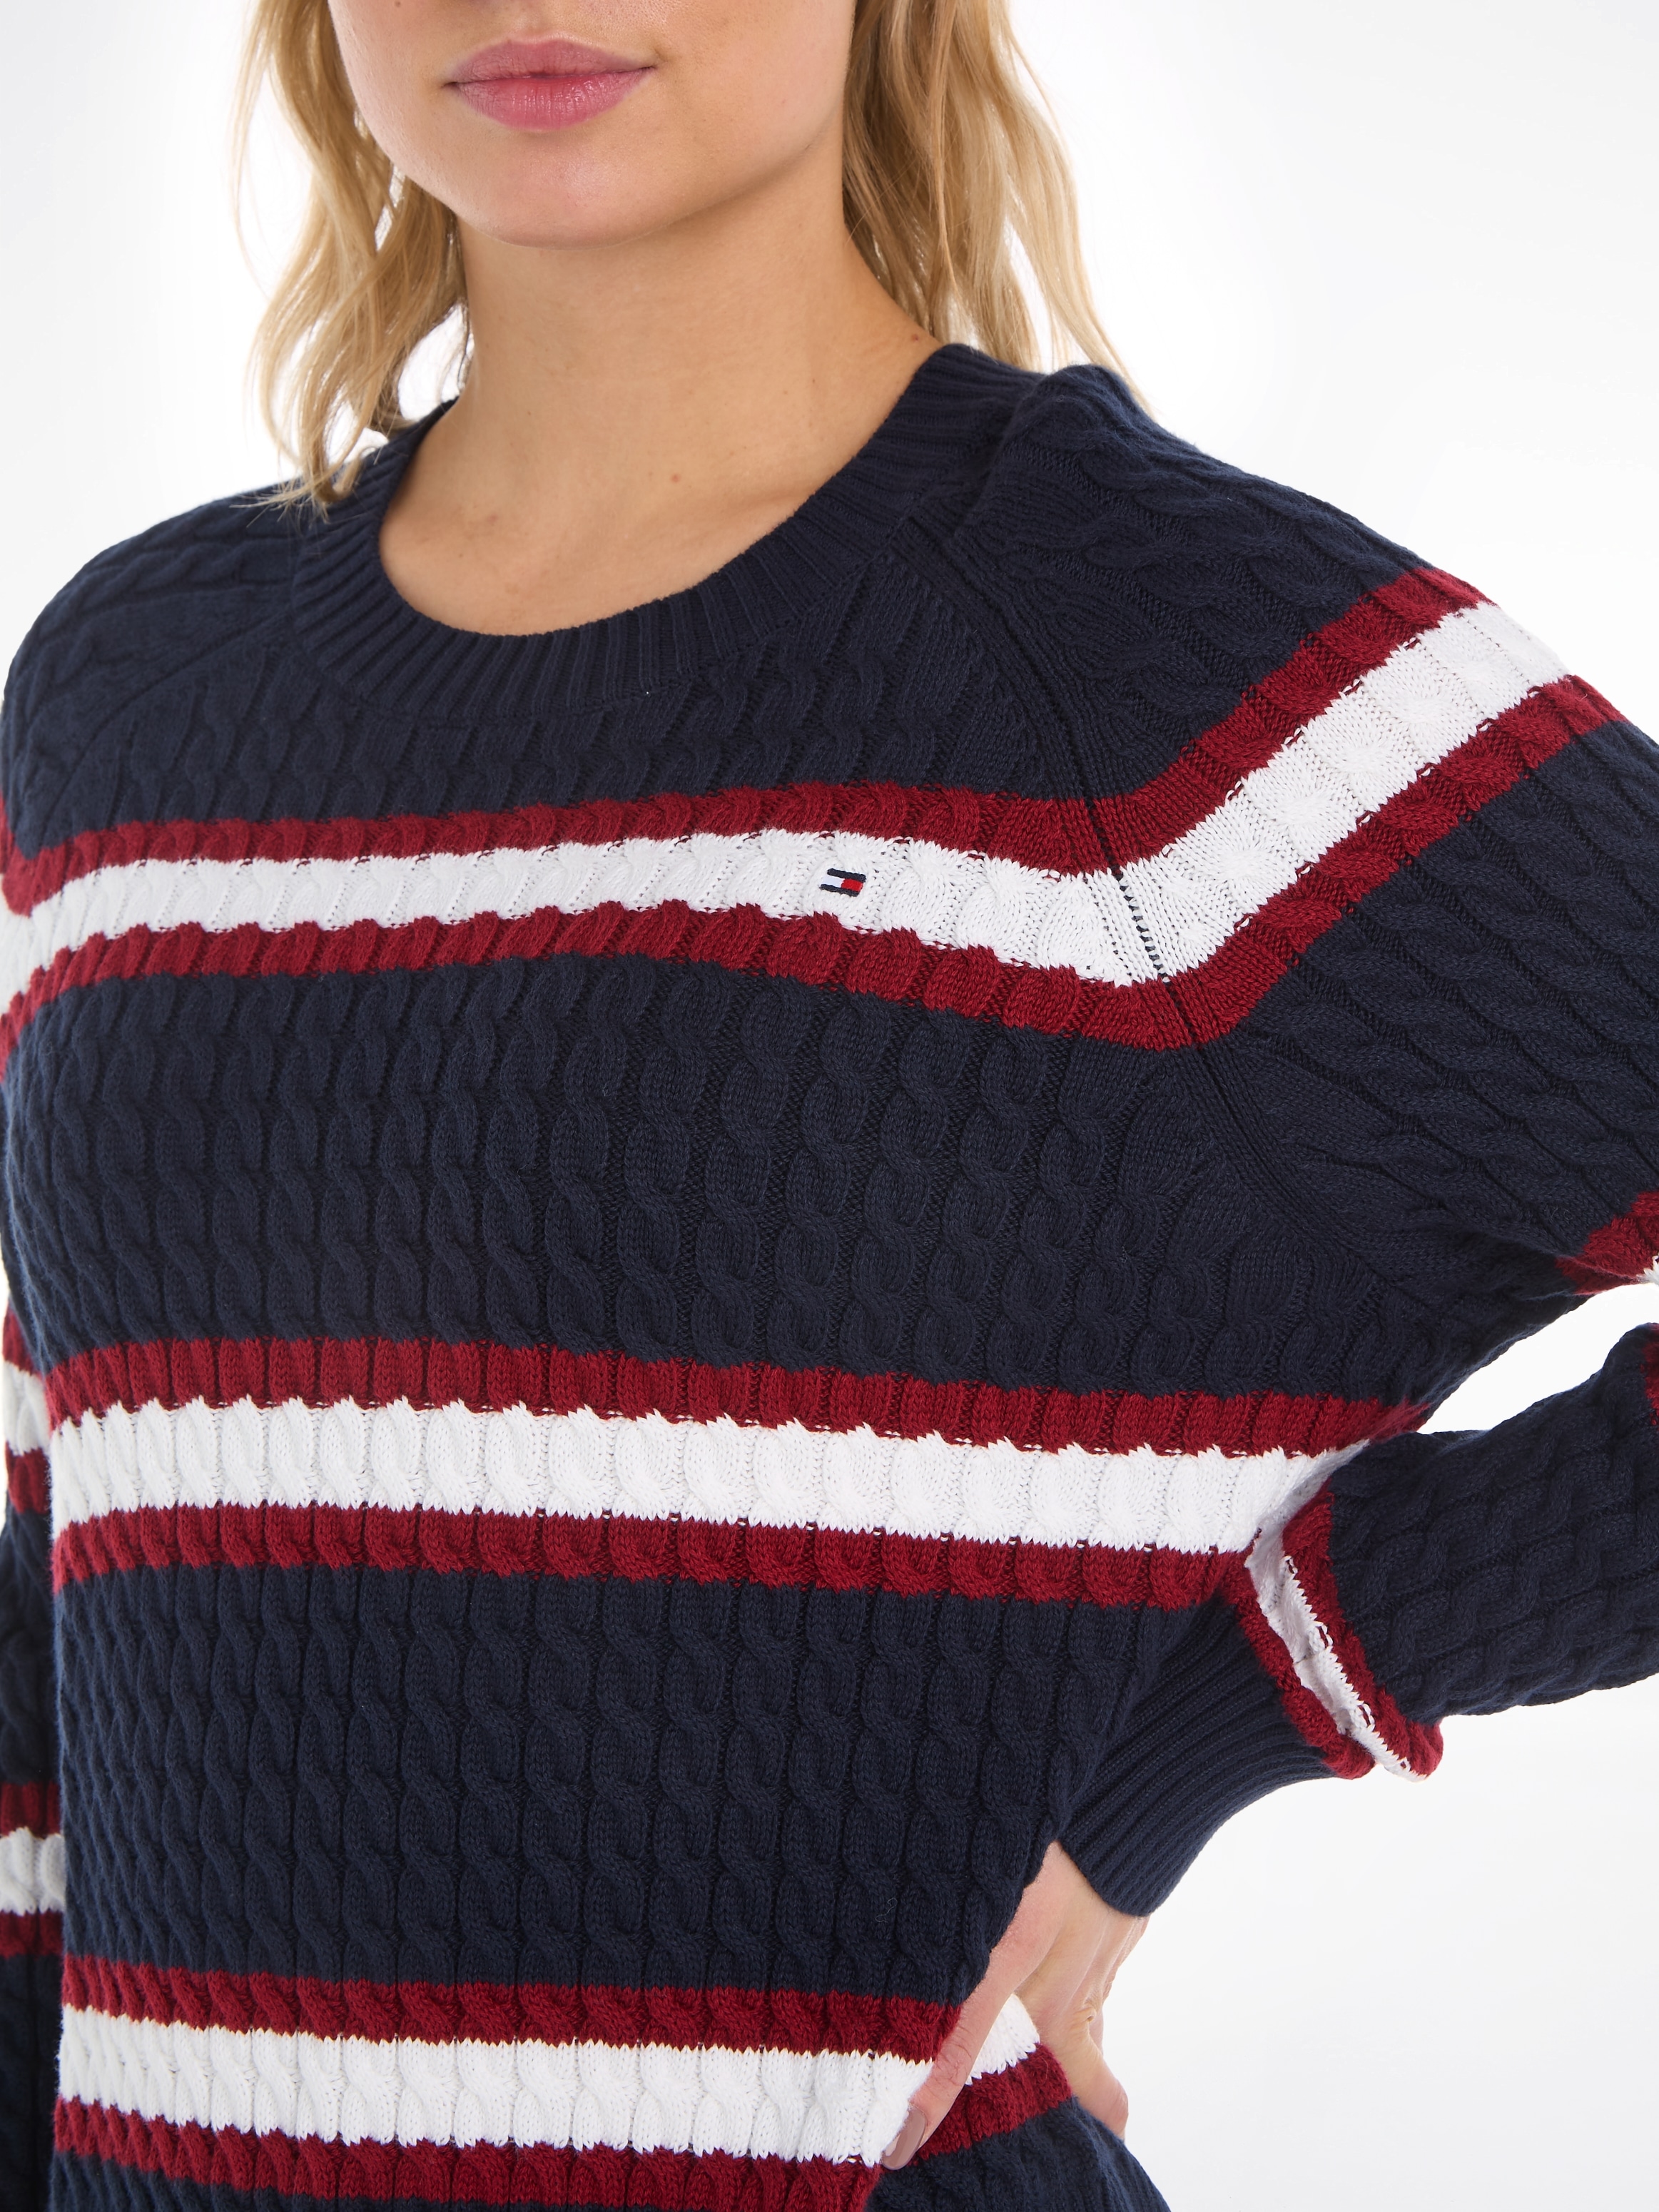 Tommy Hilfiger ♕ »CO CABLE C-NECK Logostickerei Strickpullover SWEATER«, bei MINI mit